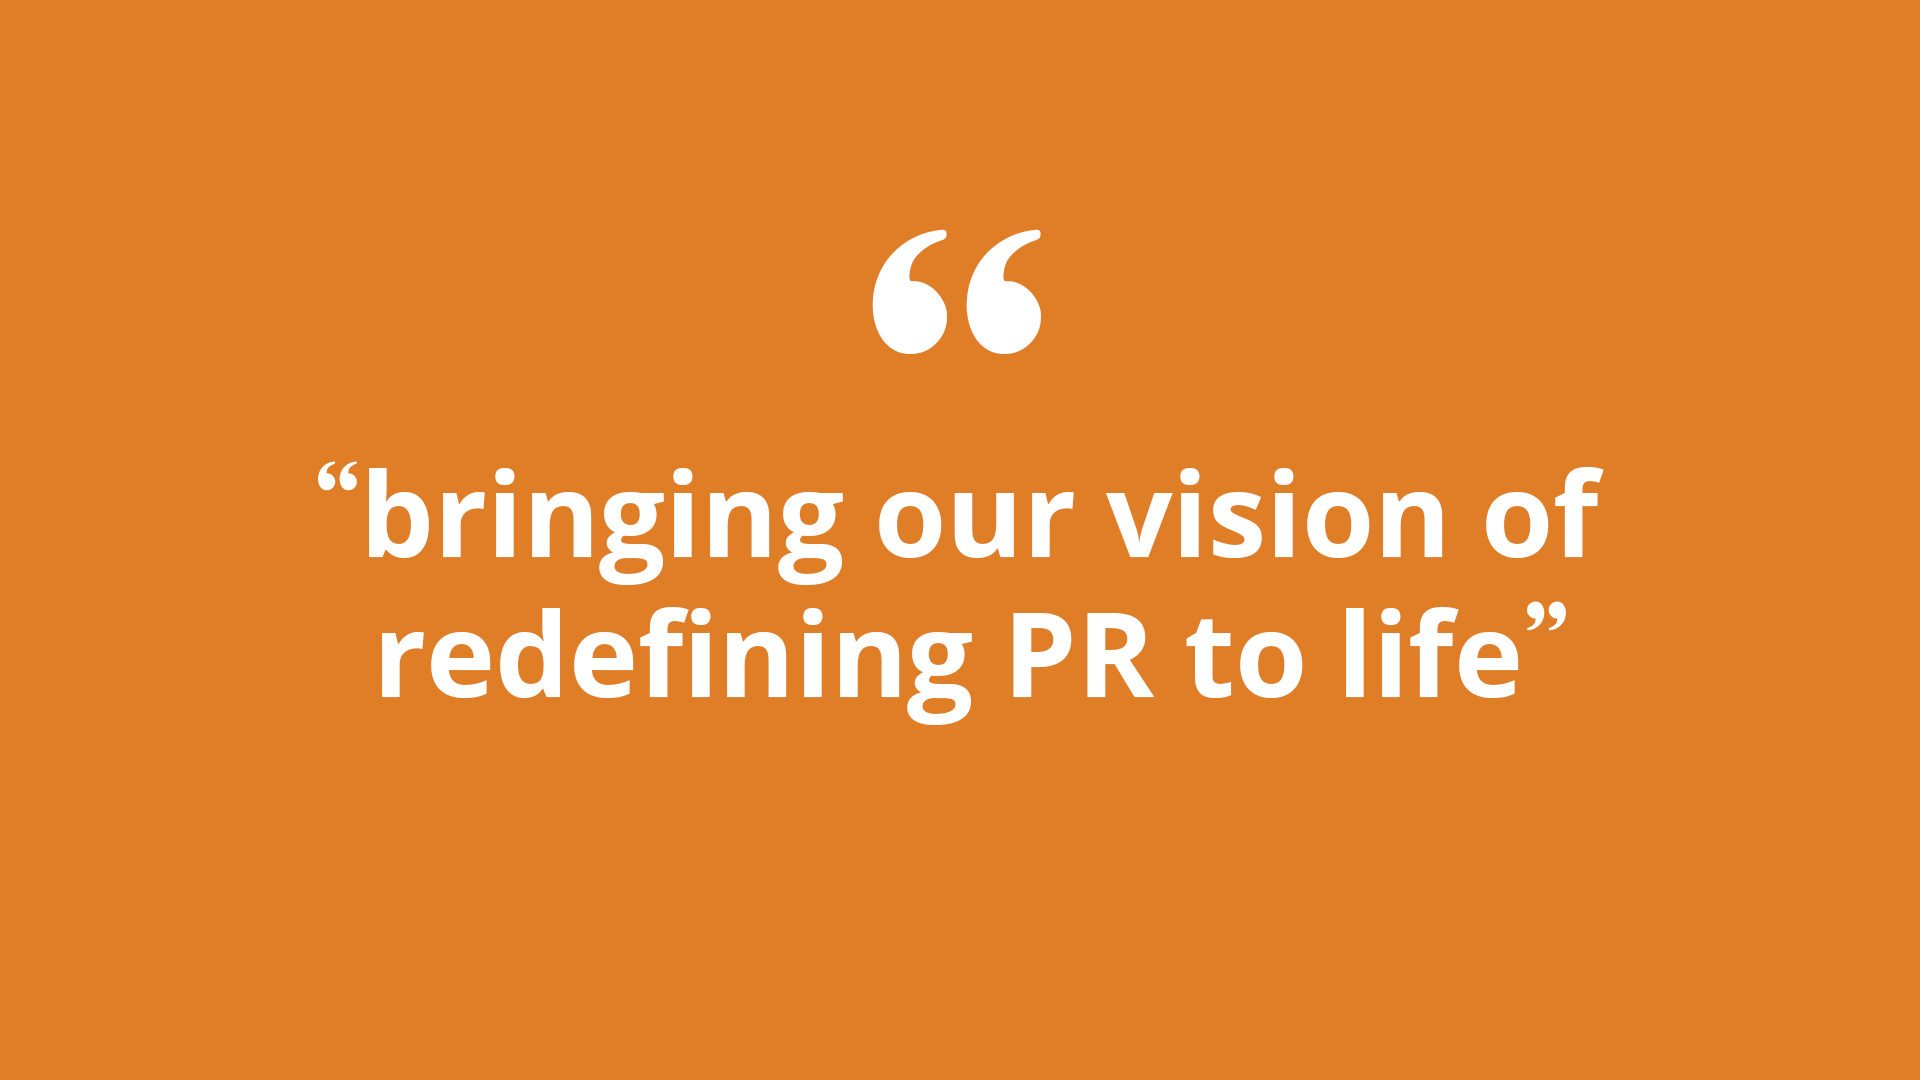 Bringing our vision of redefining PR to life